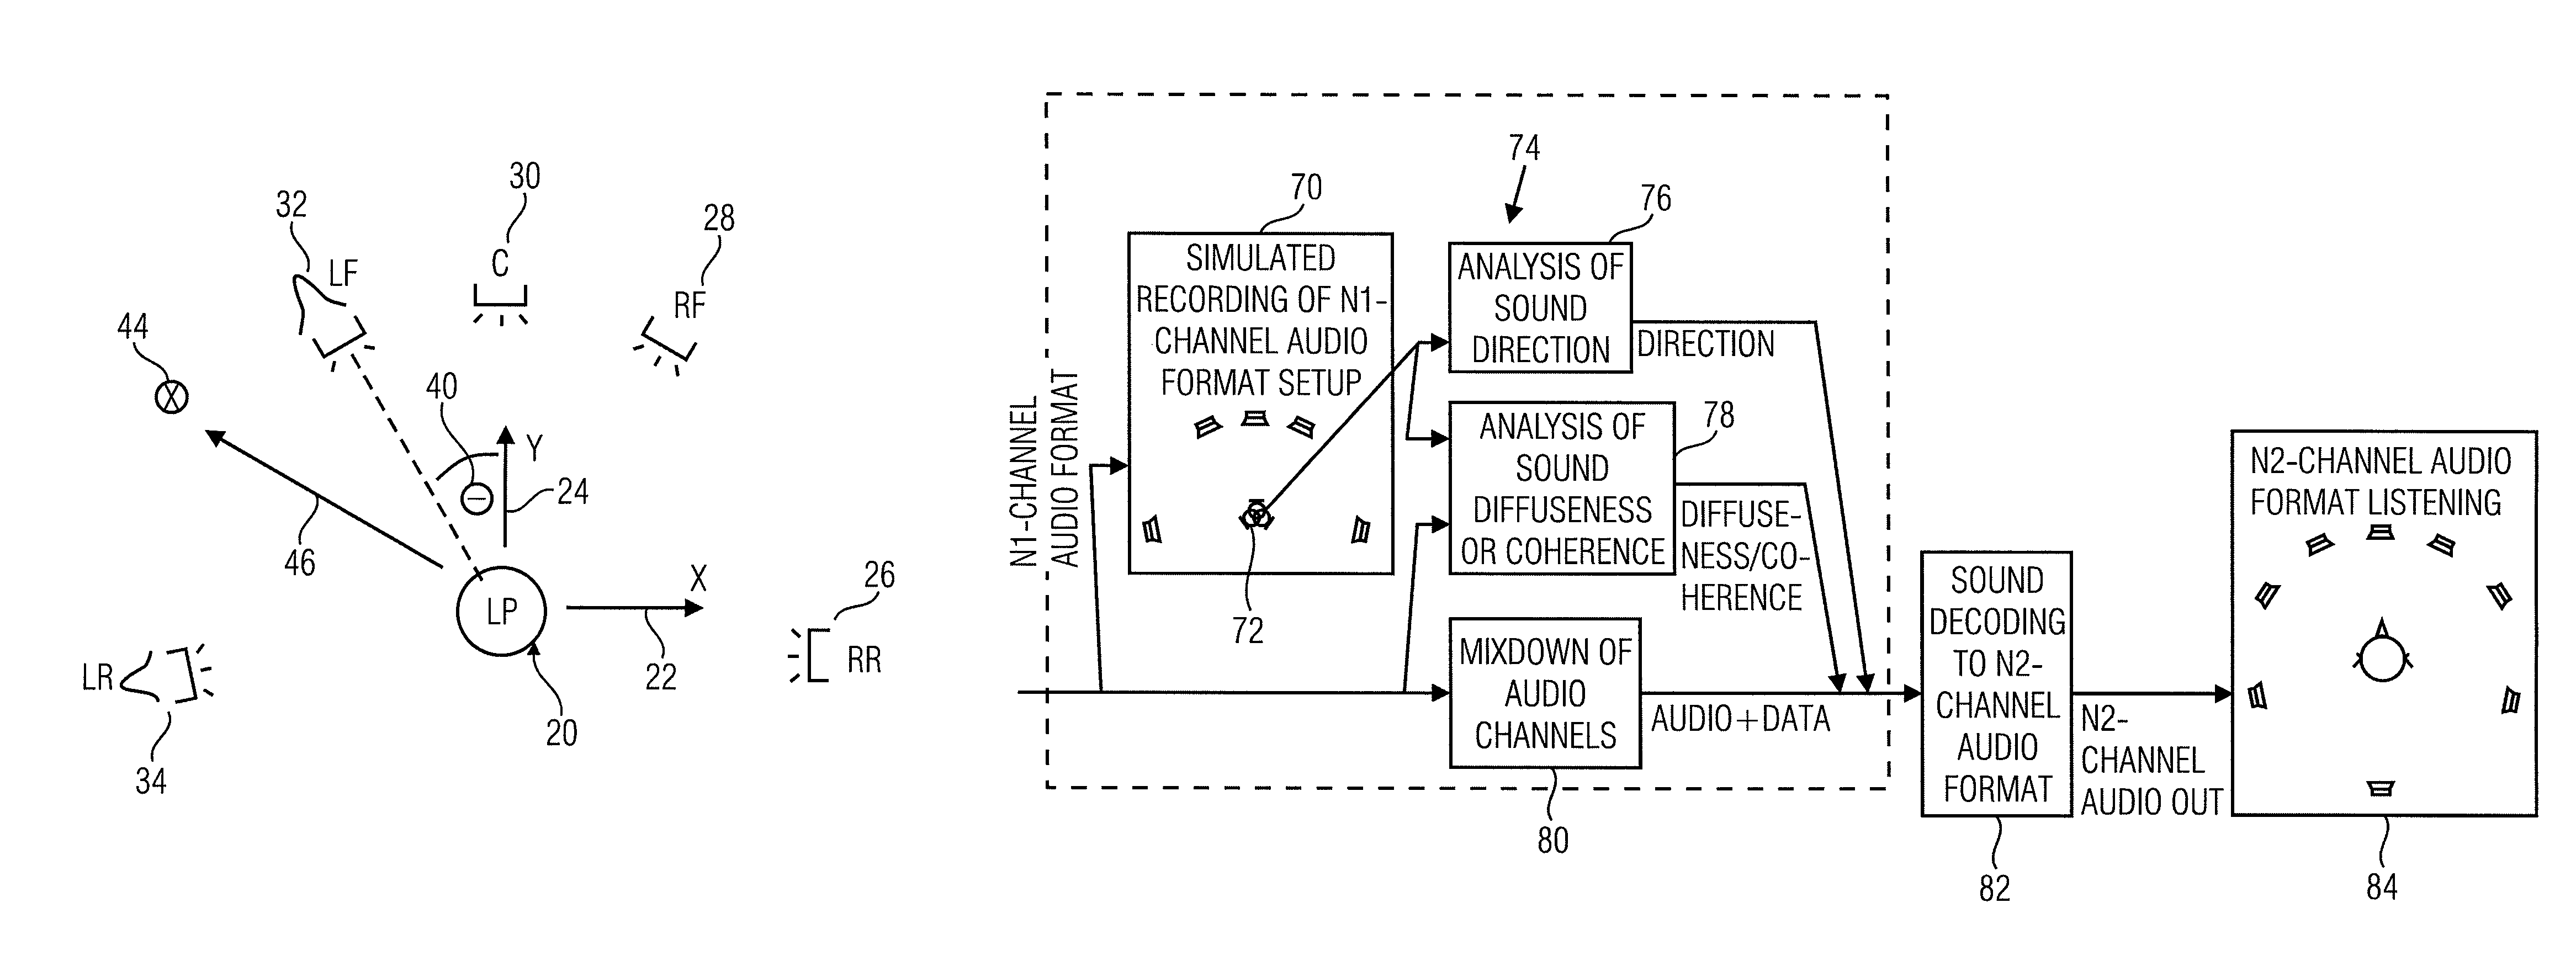 Method and apparatus for conversion between multi-channel audio formats